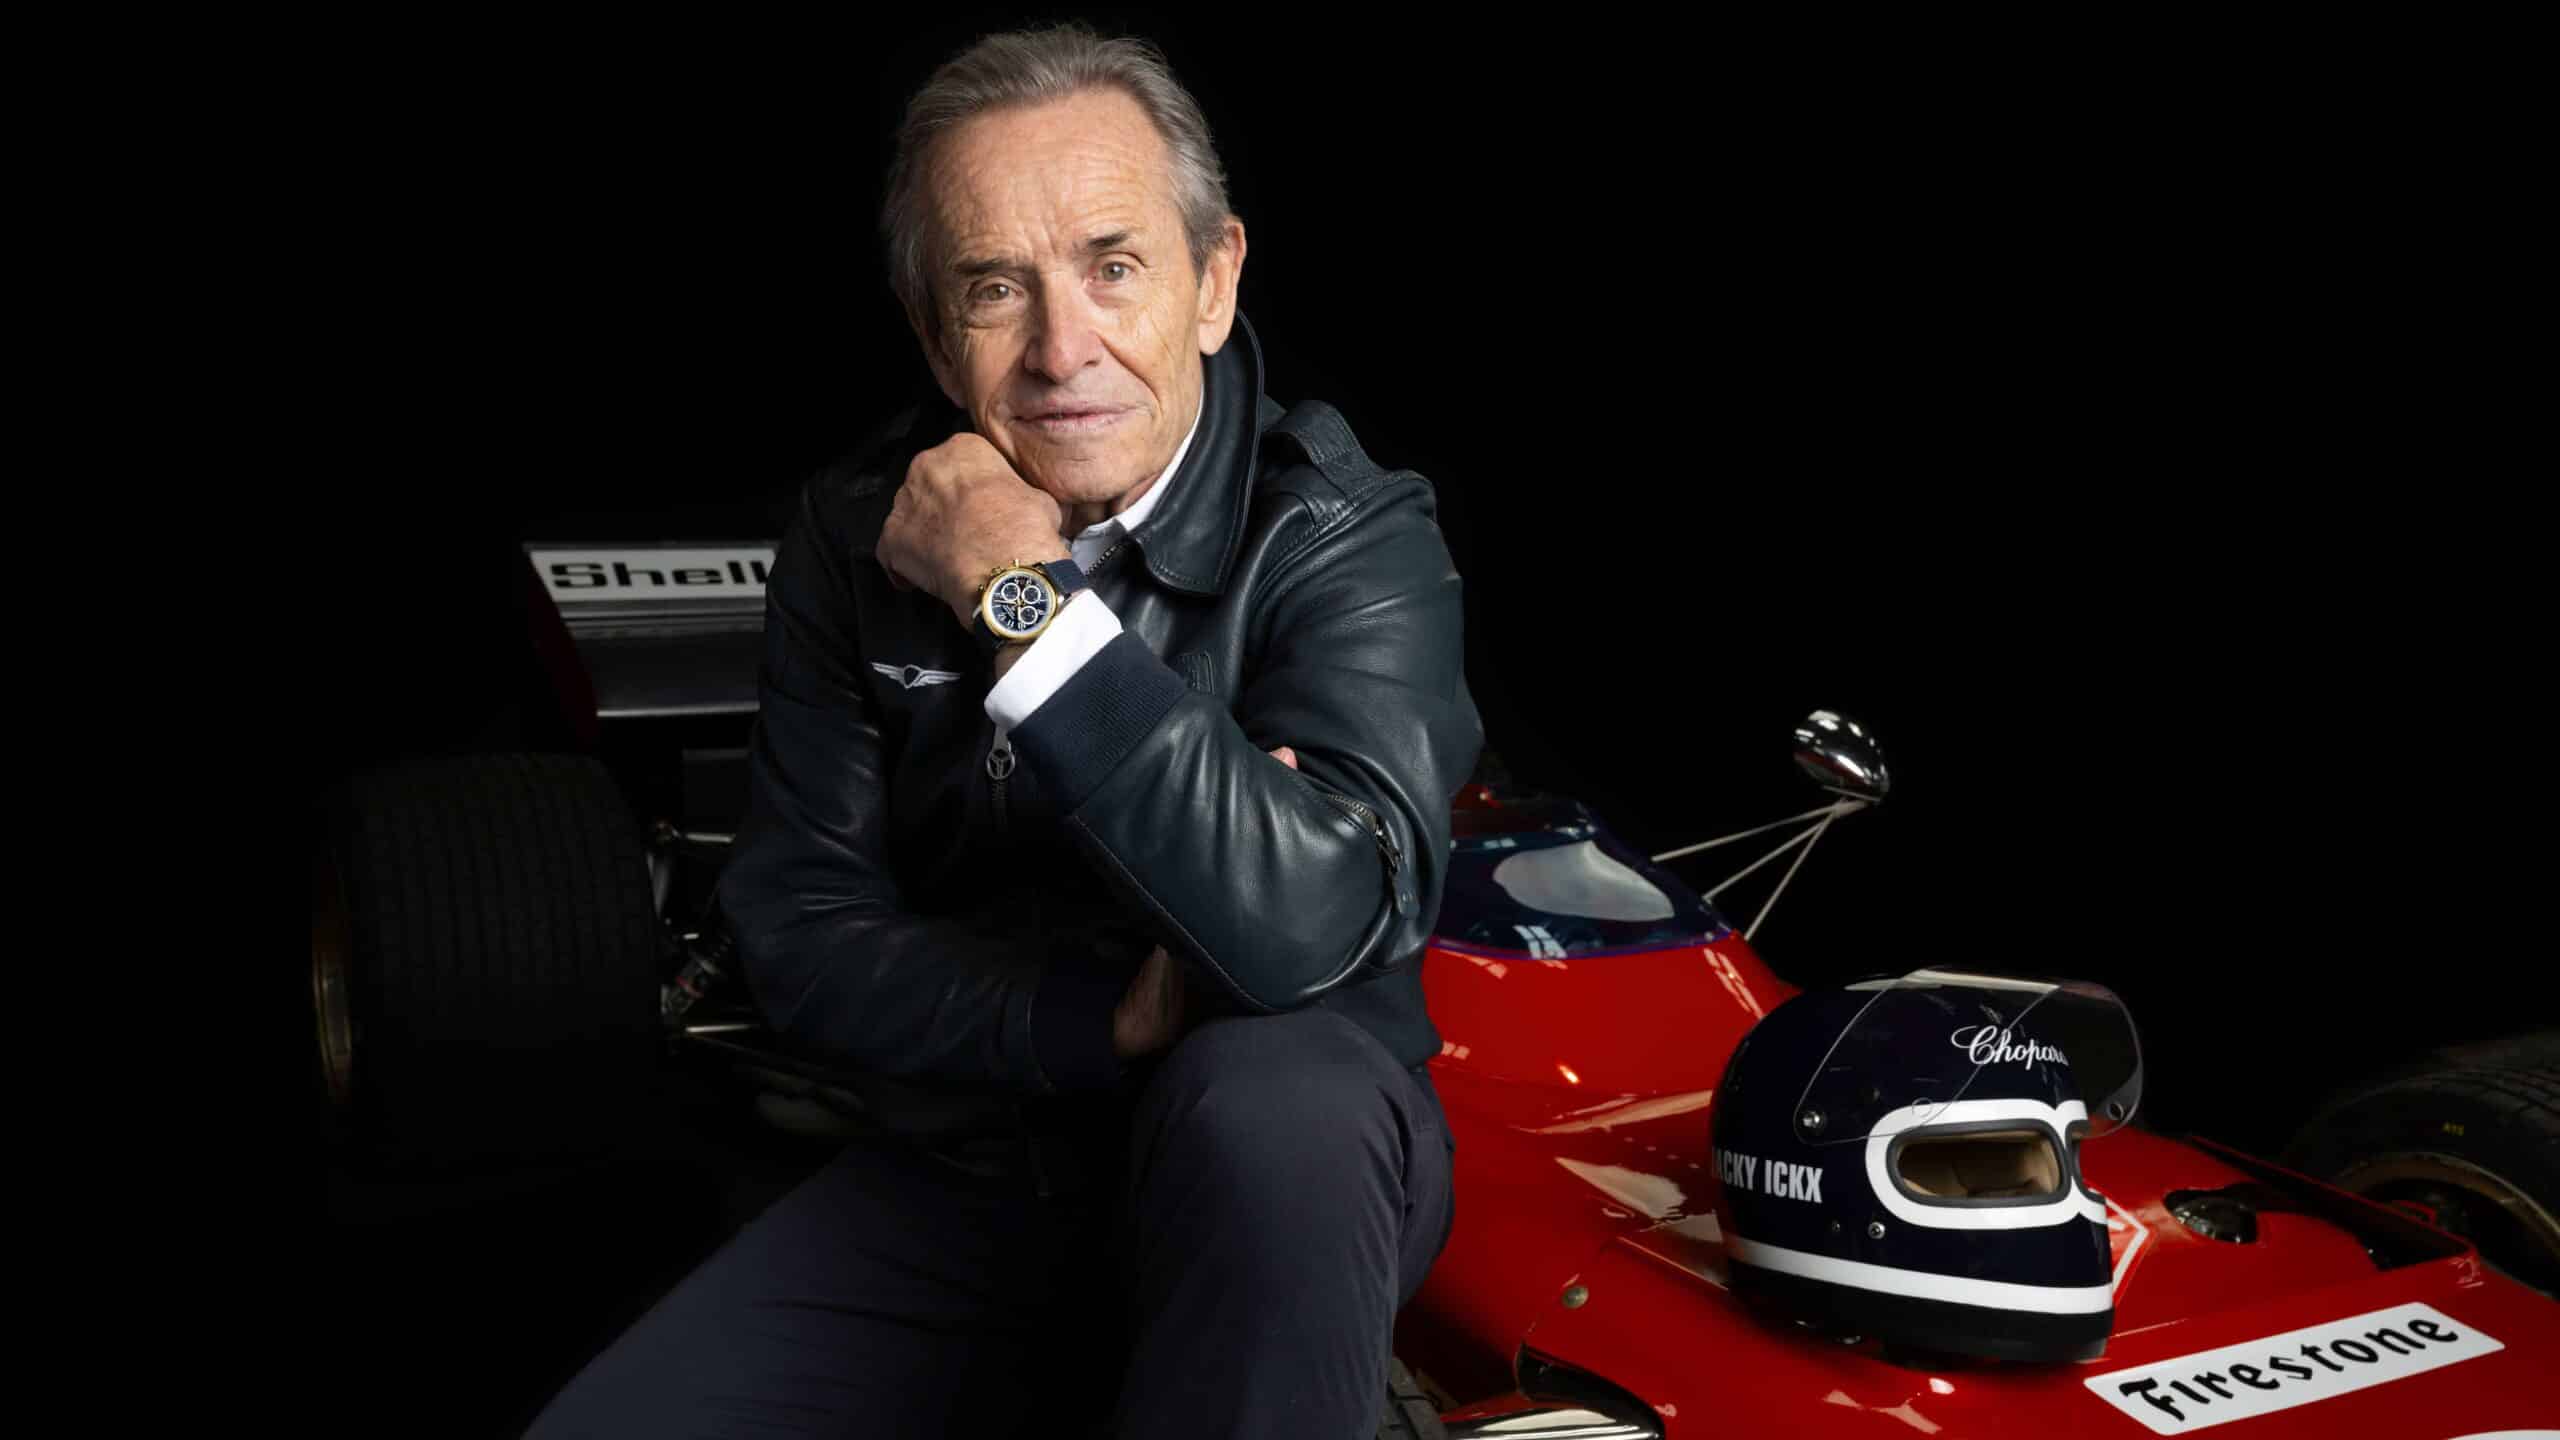 Jacky Ickx wearing the Mille Miglia Classic Chronograph JK7